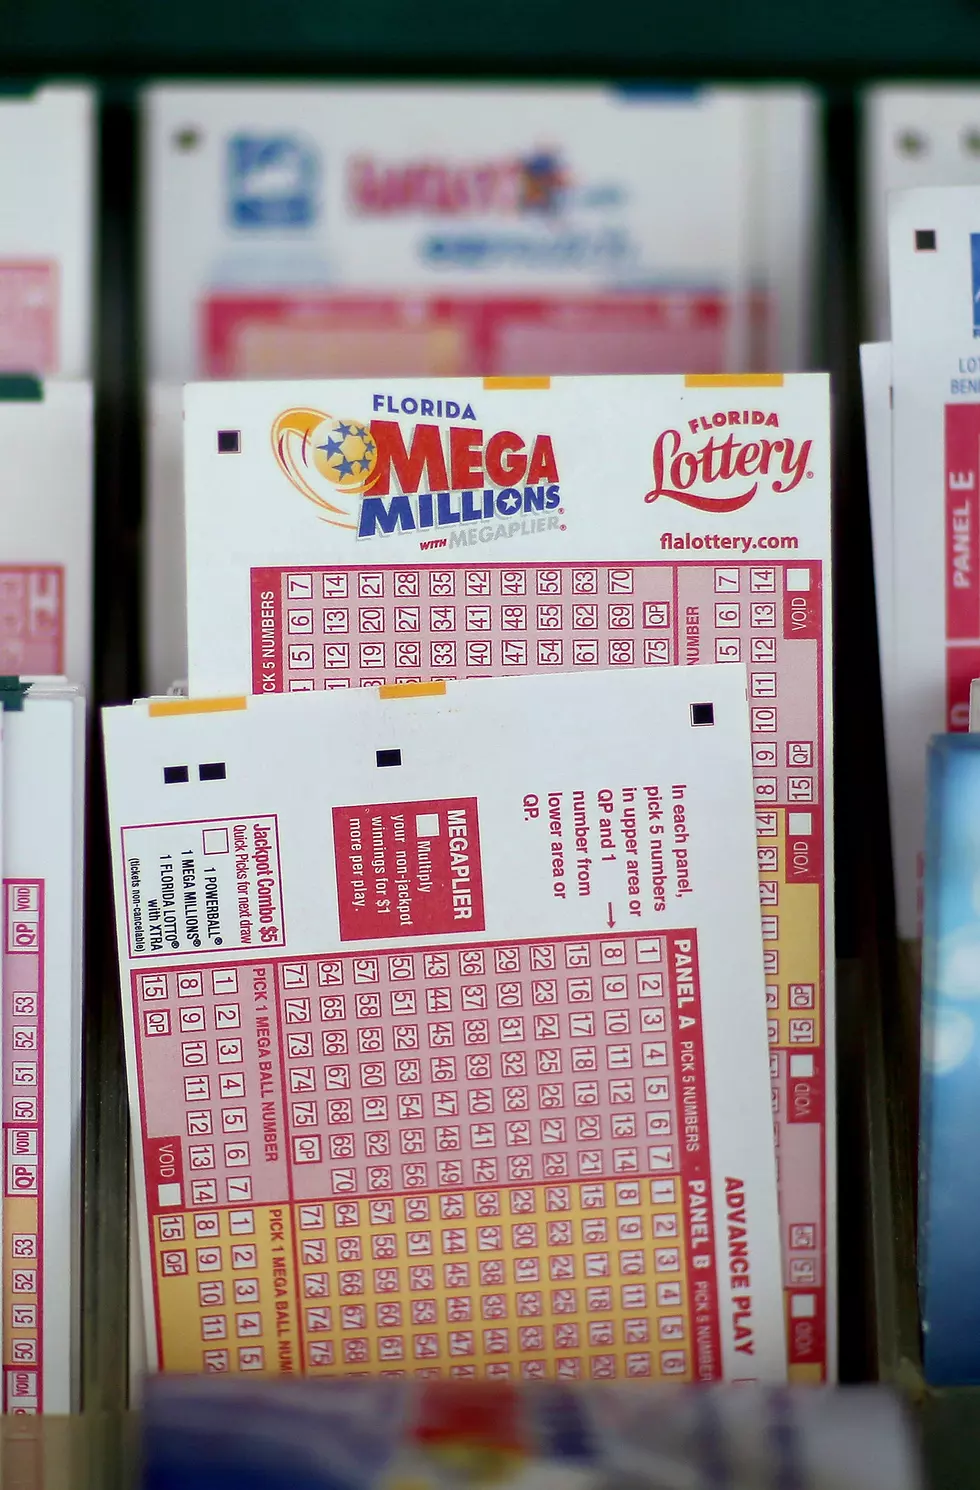 Is Friday the 13th a Lucky Day for Mega Millions Drawings? Yes!